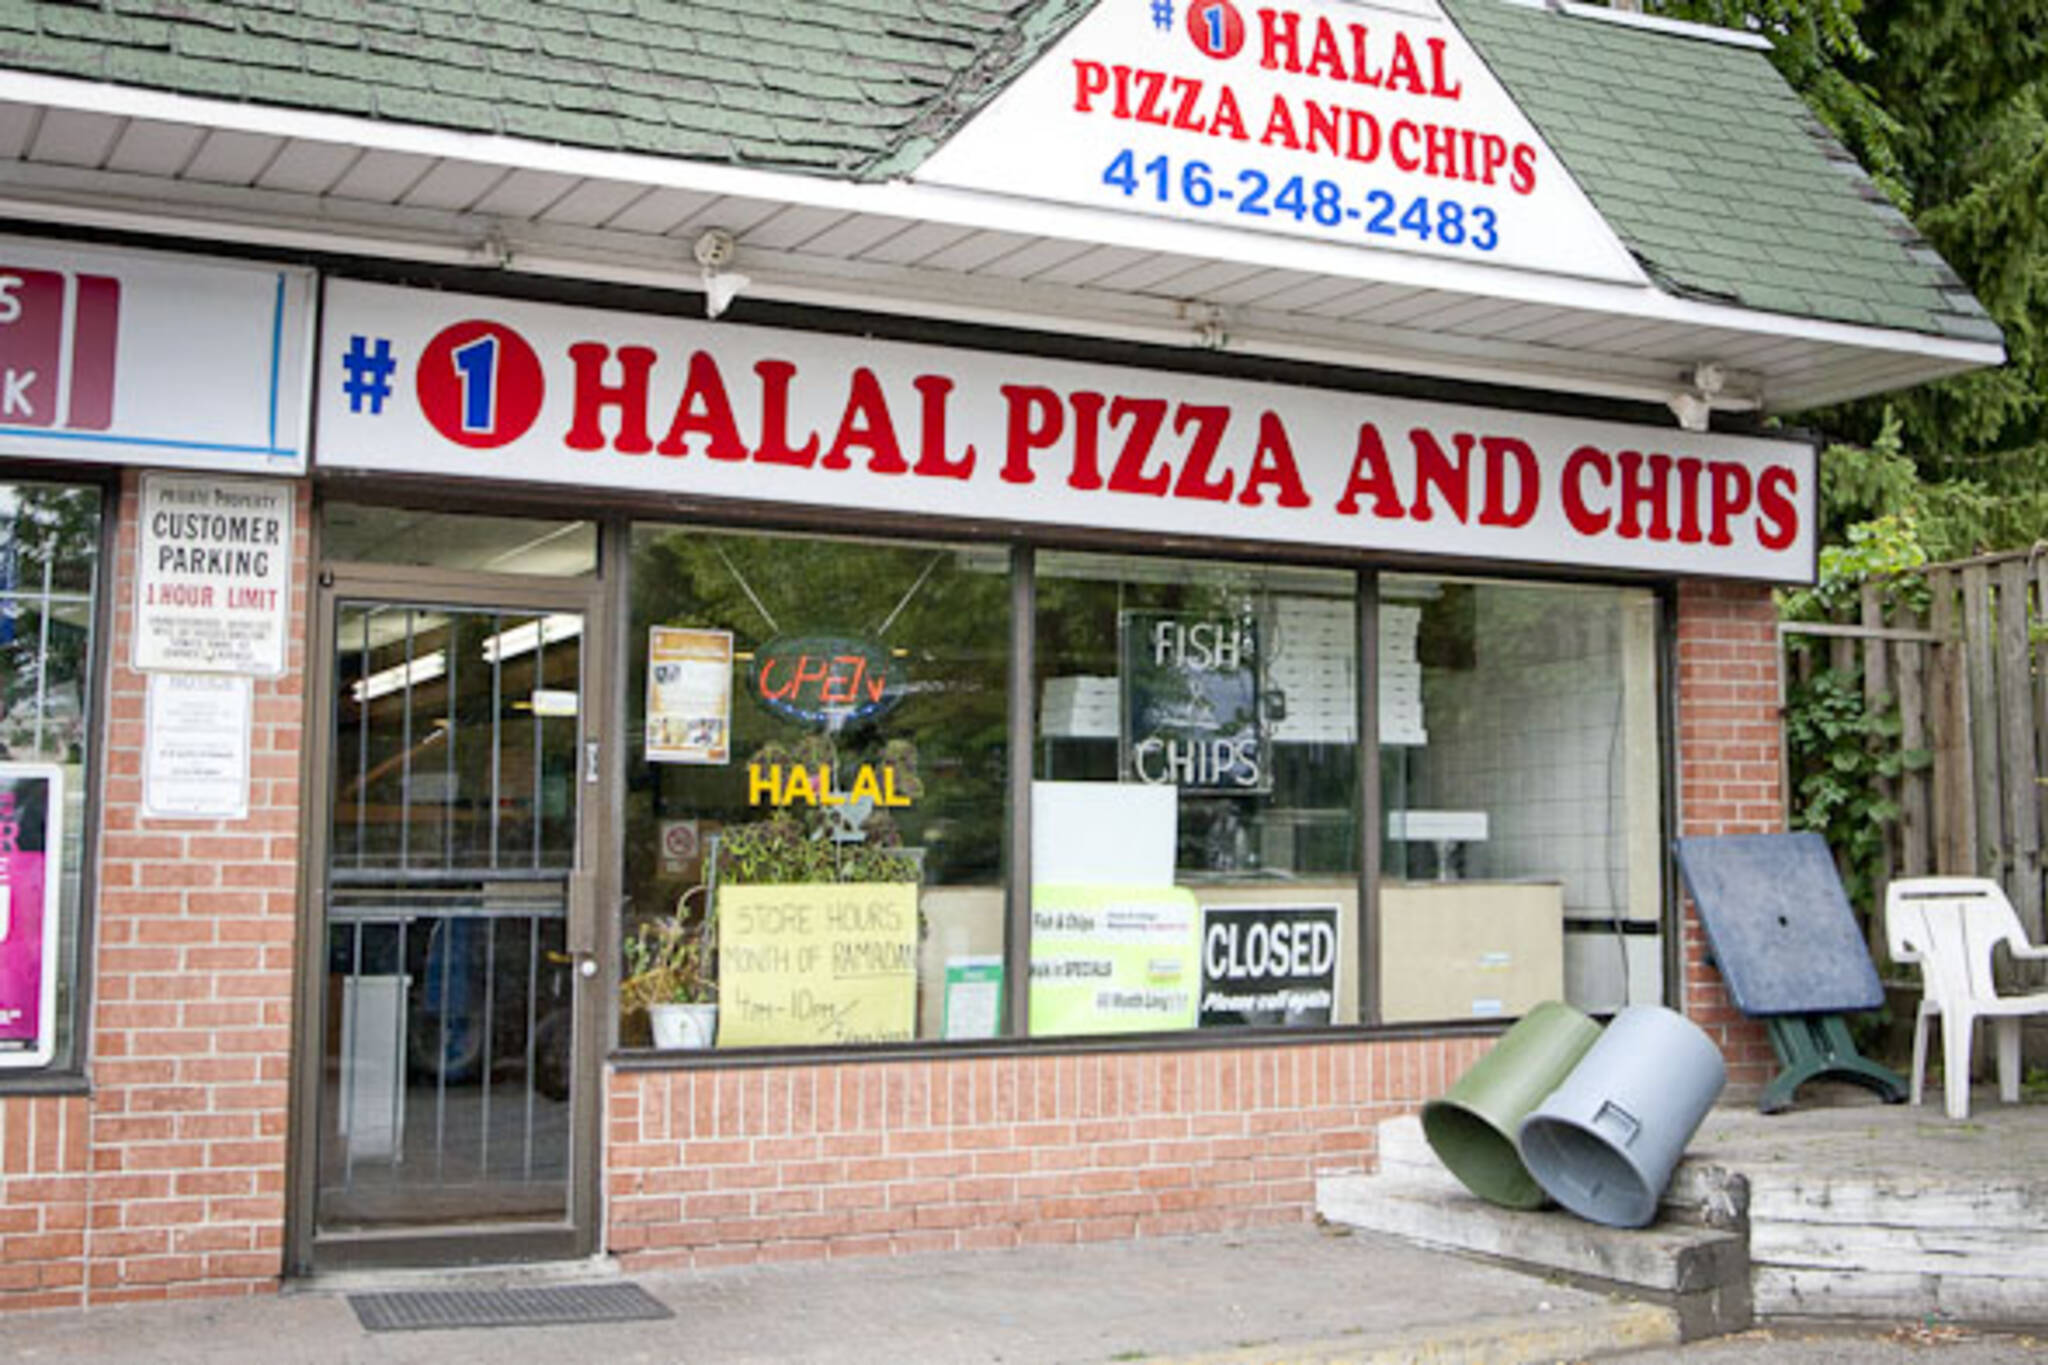 1 Halal Pizza and Chips